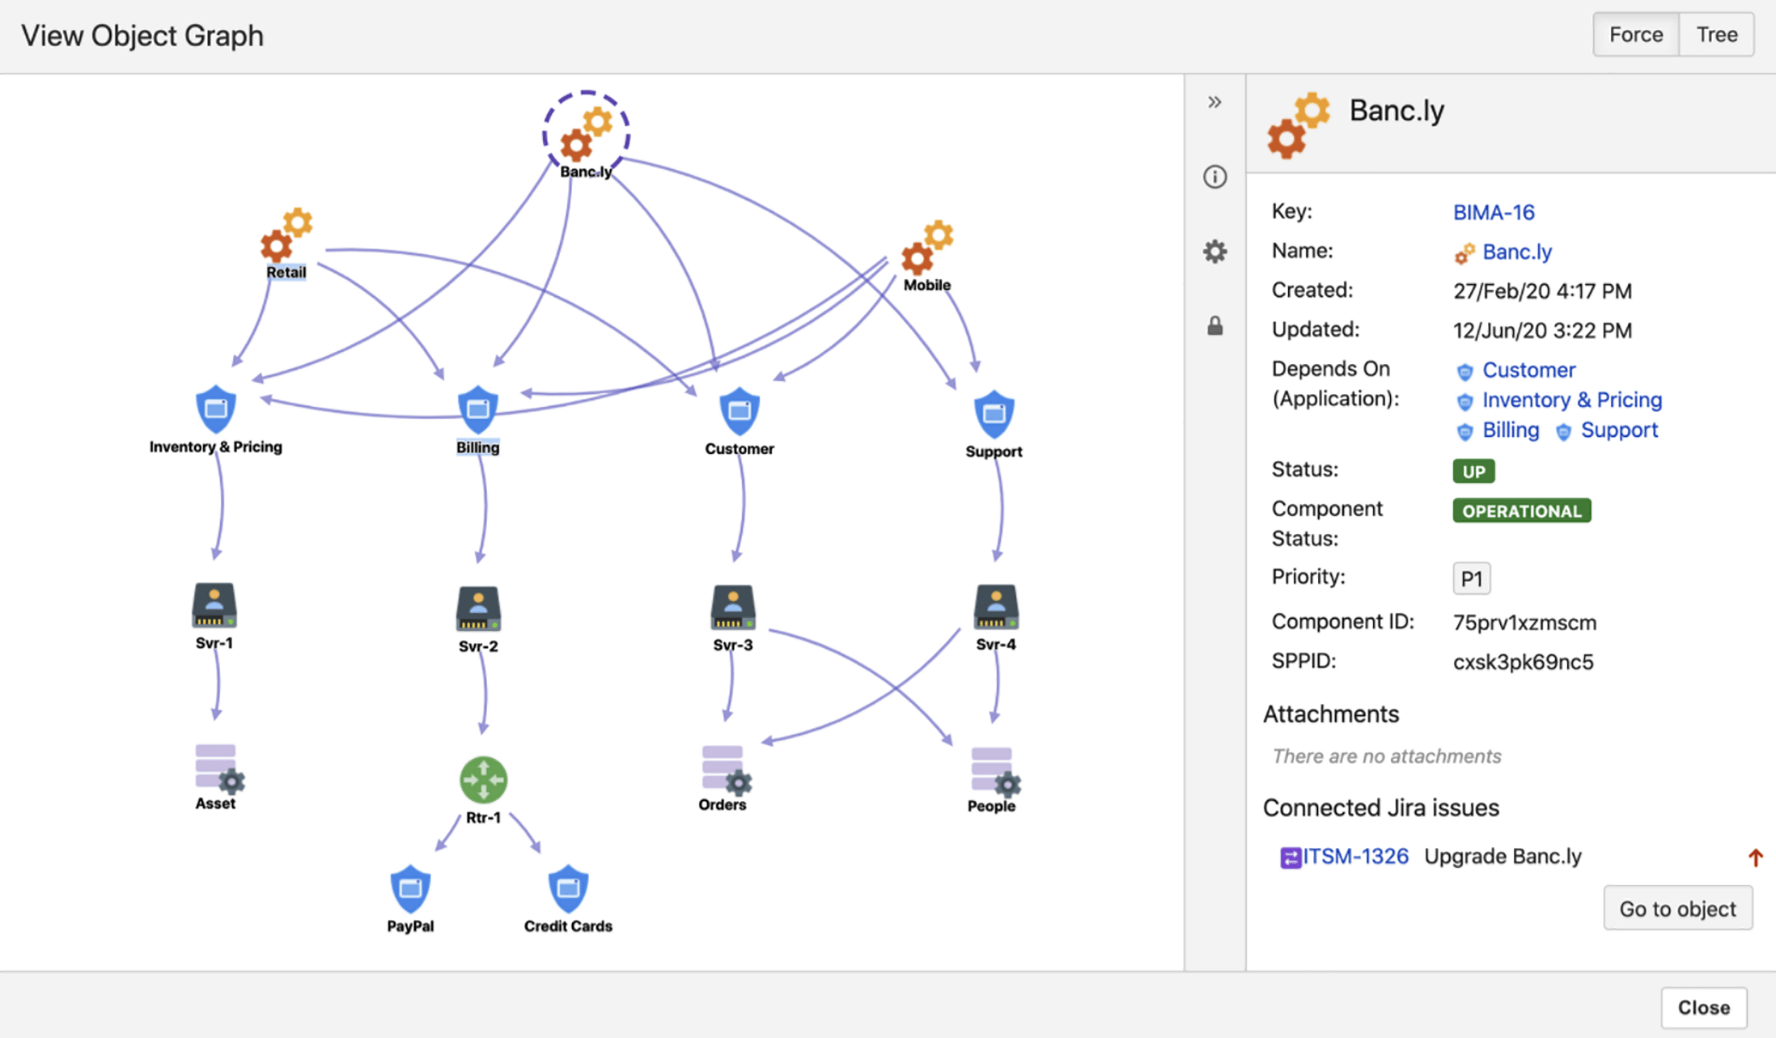 Insight graphical viewer window for the object ‘Jira Service Management’ showing the dependencies of a service including software, hosts, and other services.